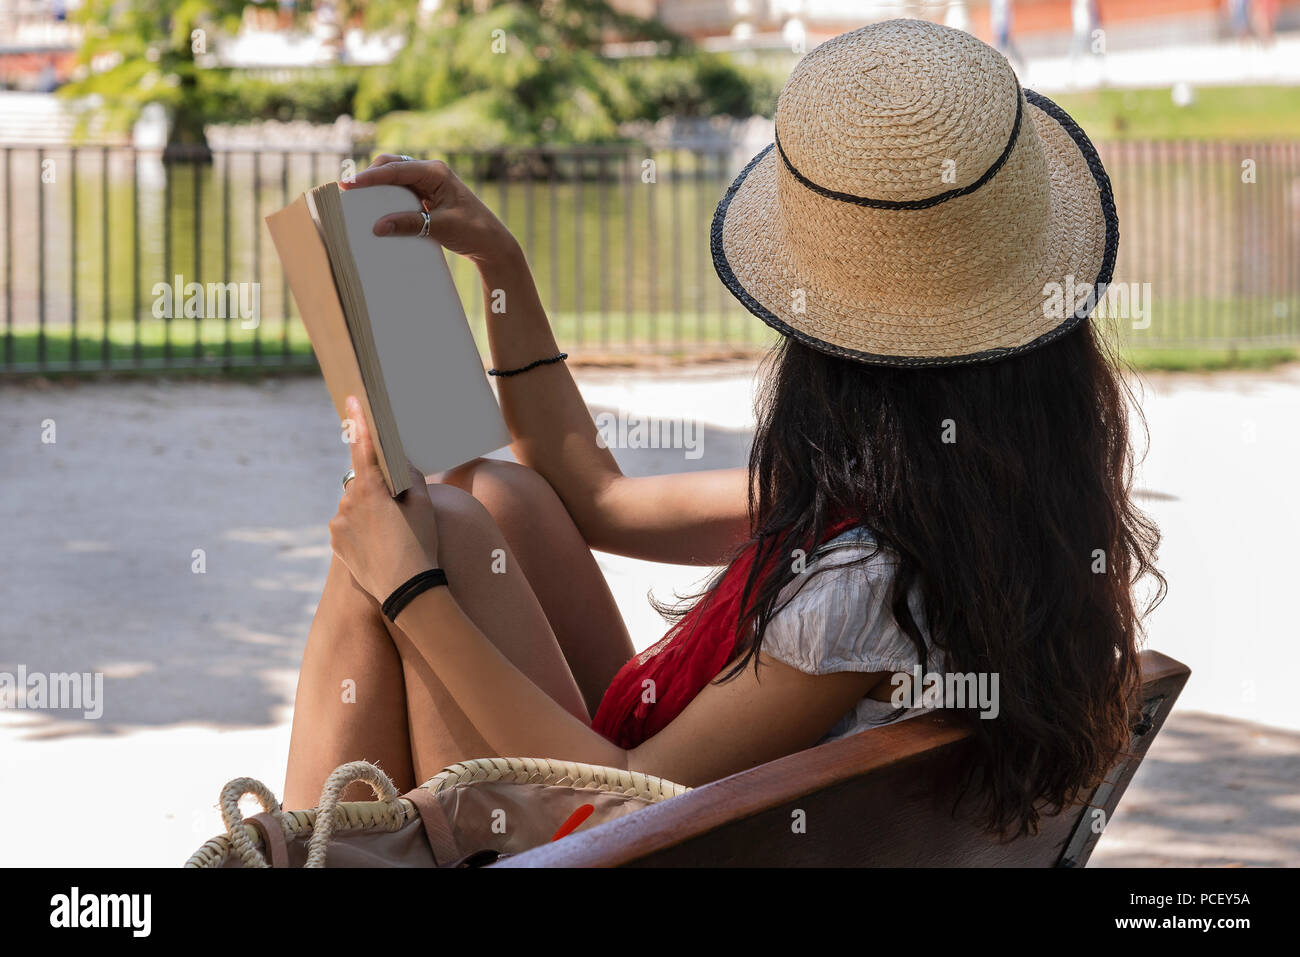 eautiful young lady reading a book, sitting on a bench in the park. Relaxed concept Stock Photo